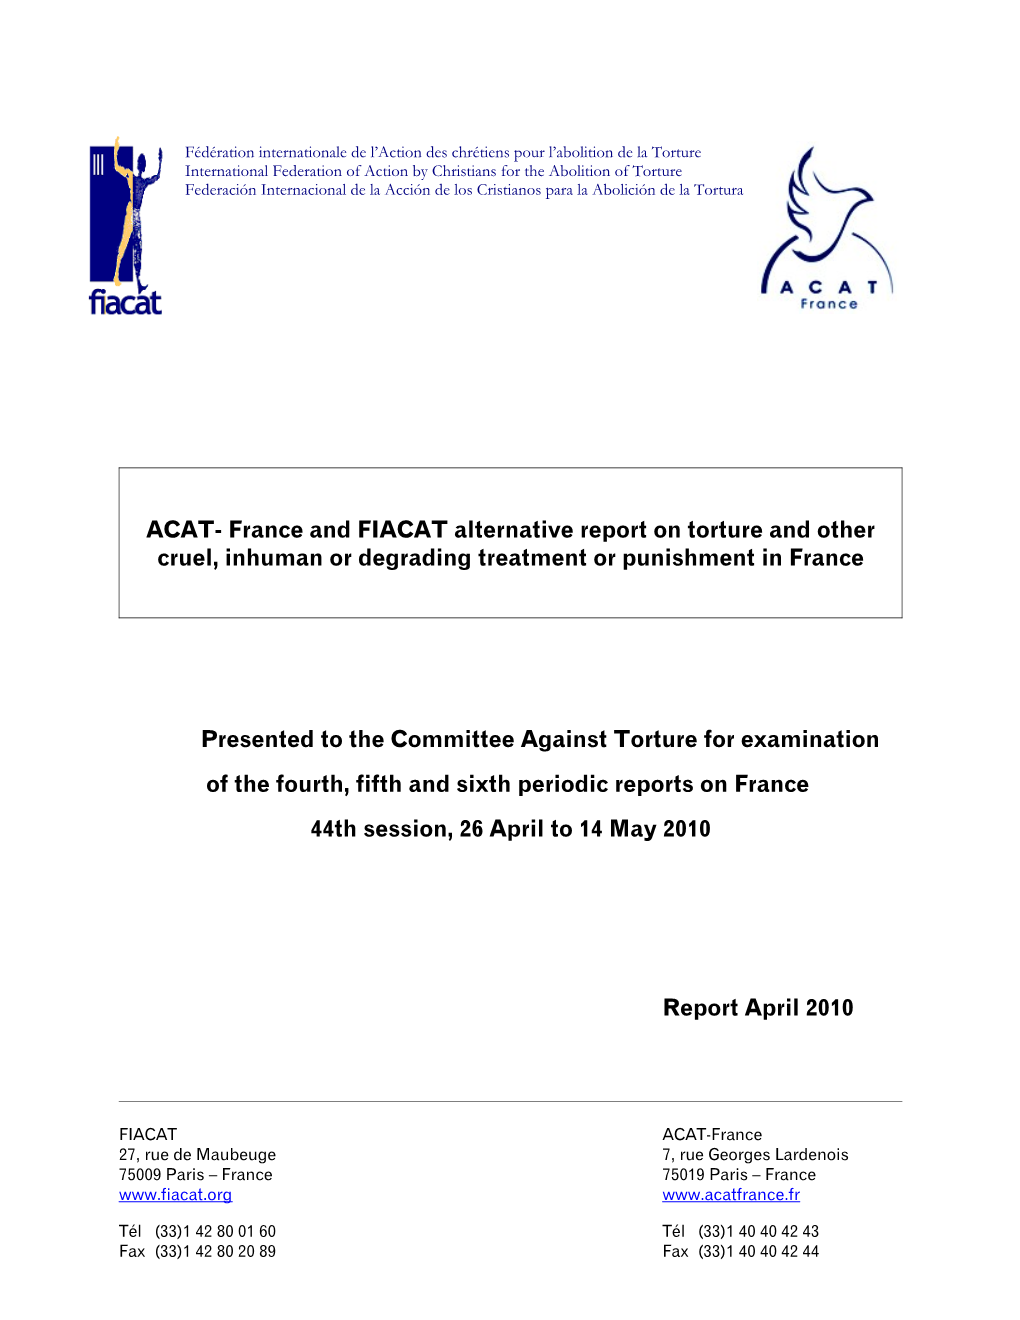 ACAT- France and FIACAT Alternative Report on Torture and Other Cruel, Inhuman Or Degrading Treatment Or Punishment in France